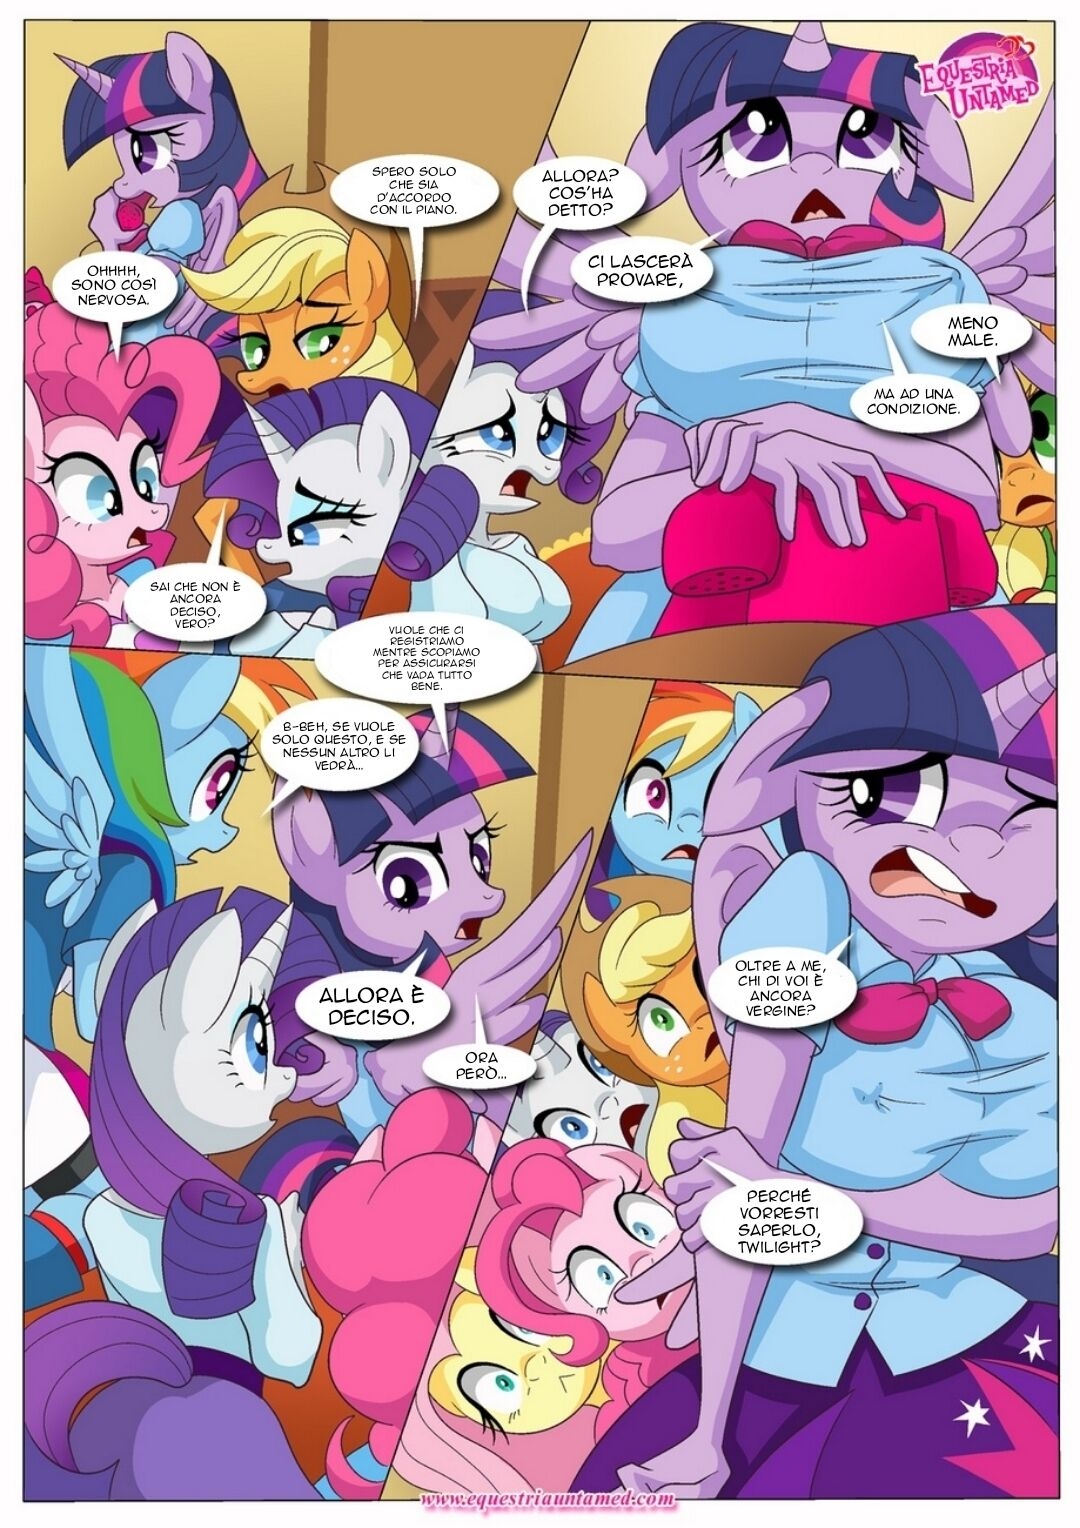 [Palcomix] The Power Of Dragon Mating (My Little Pony Friendship Is Magic) (italian) 19